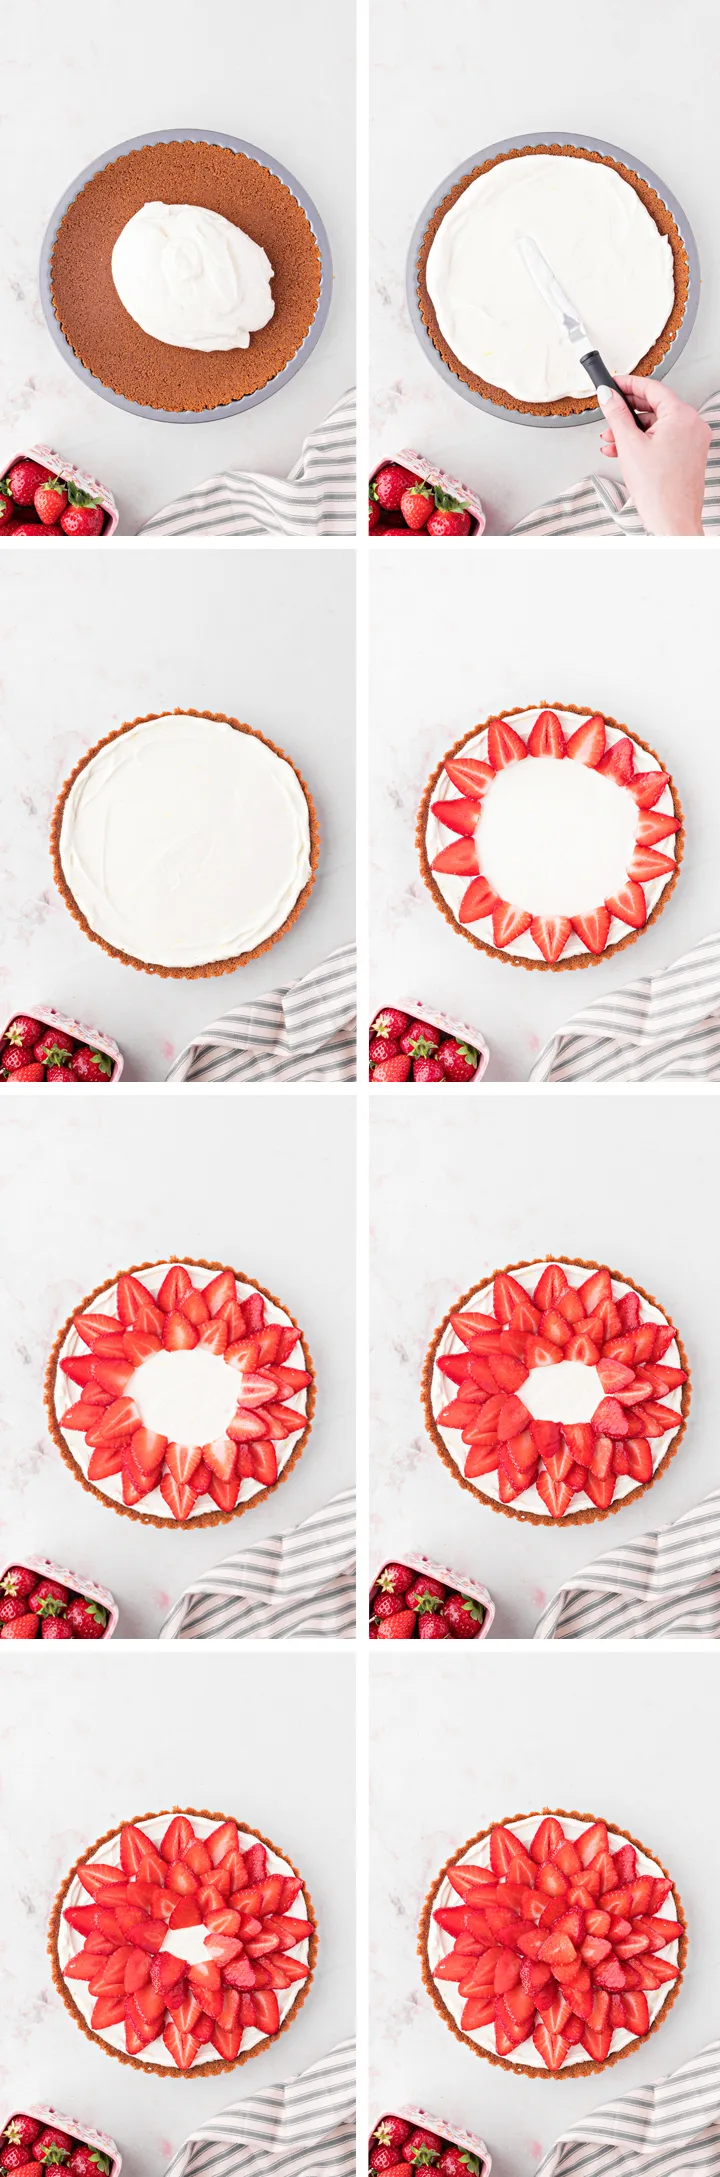 step by step photos showing how to decorate a no-bake strawberry lemon tart with sliced strawberries